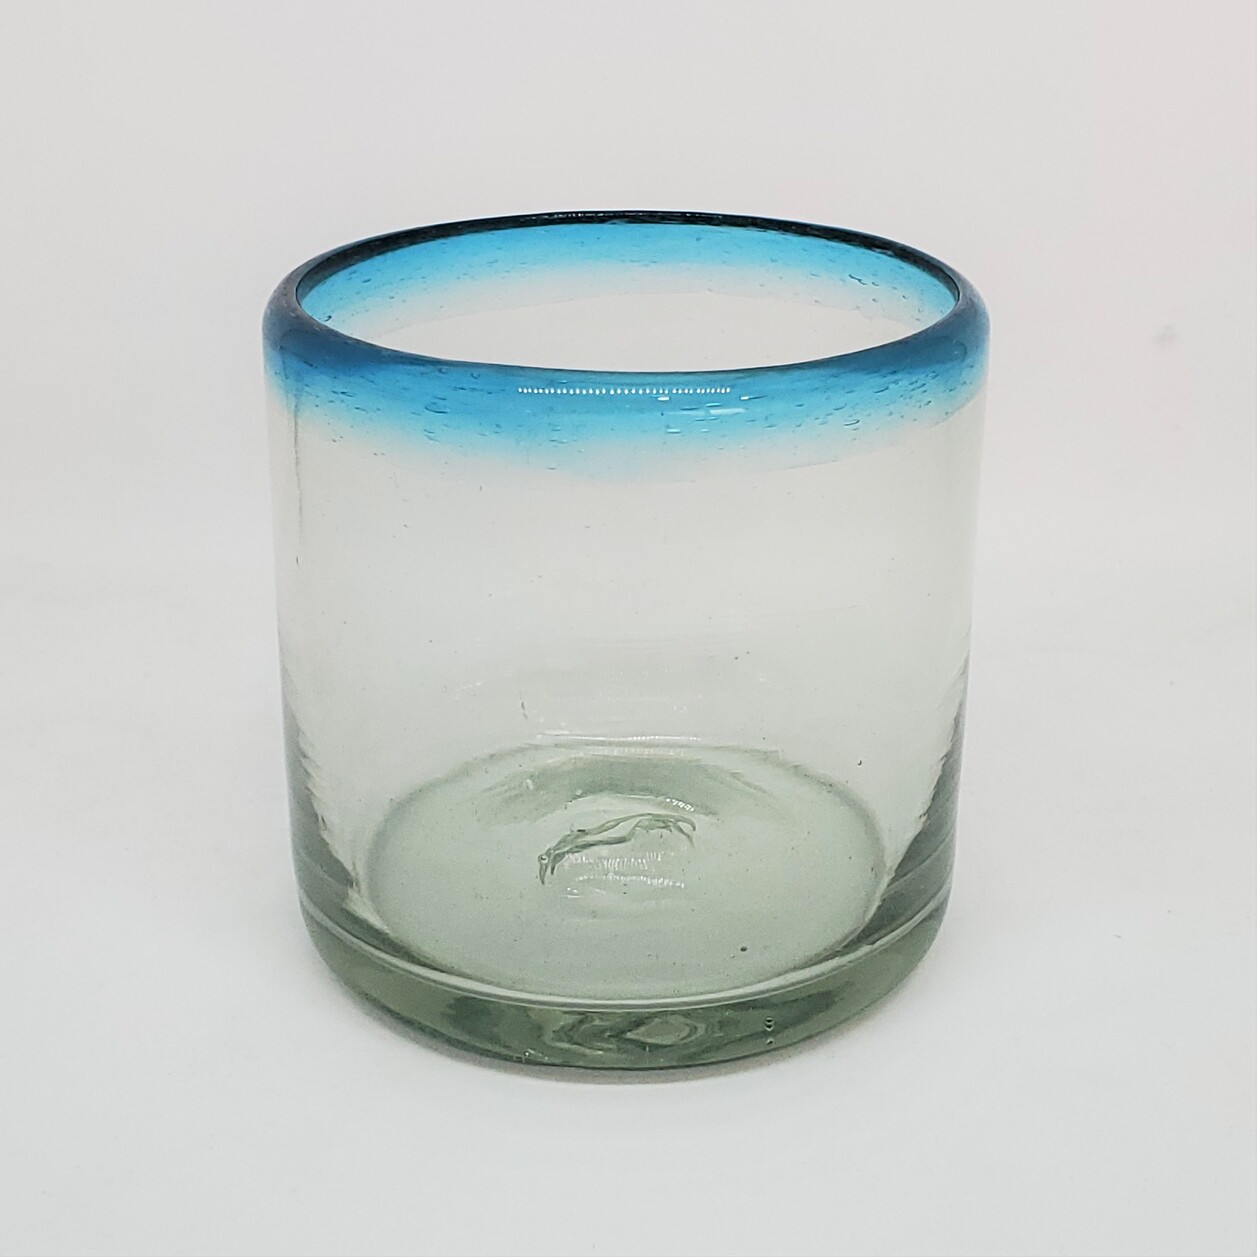 New Items / Aqua Blue Rim 8 oz DOF Rocks Glasses (set of 6) / These glasses are just the right size to enjoy fresh squeezed fruit juice in the moning.